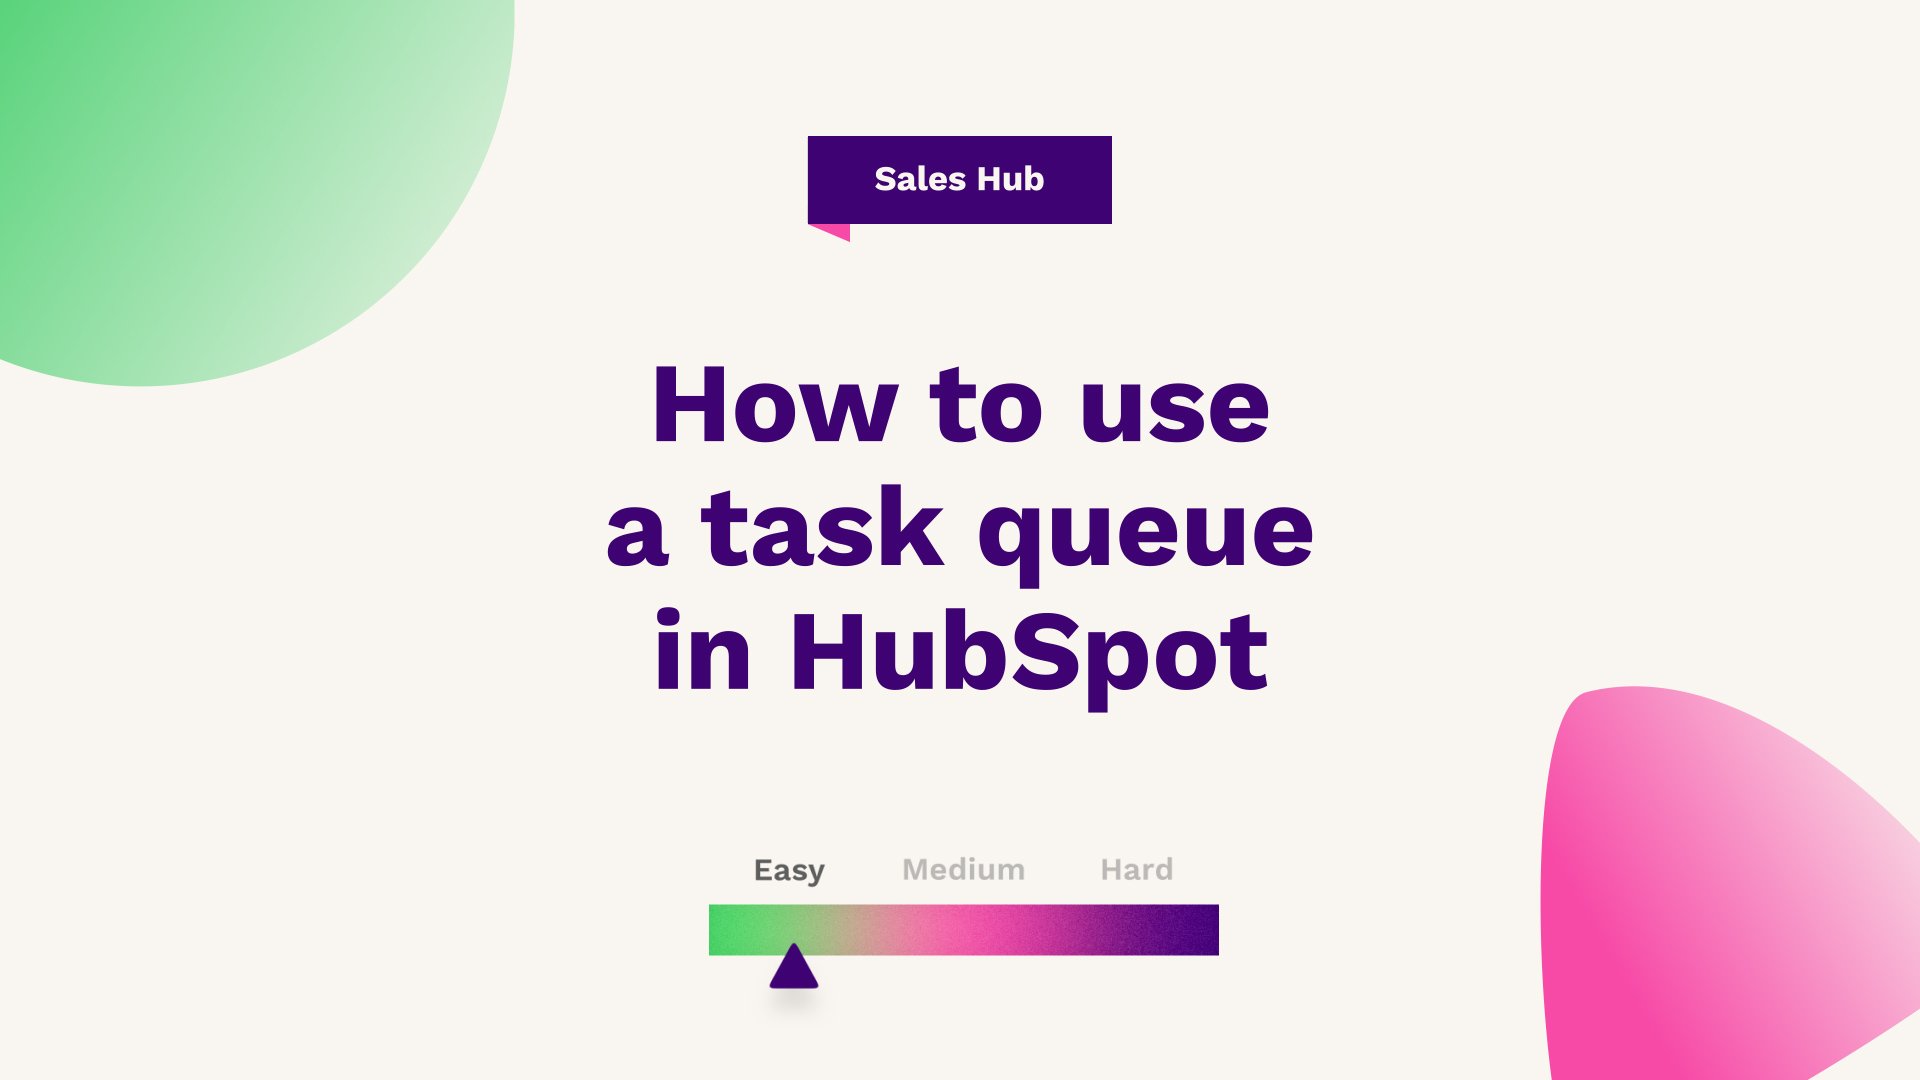 What is a Task Queue in HubSpot?